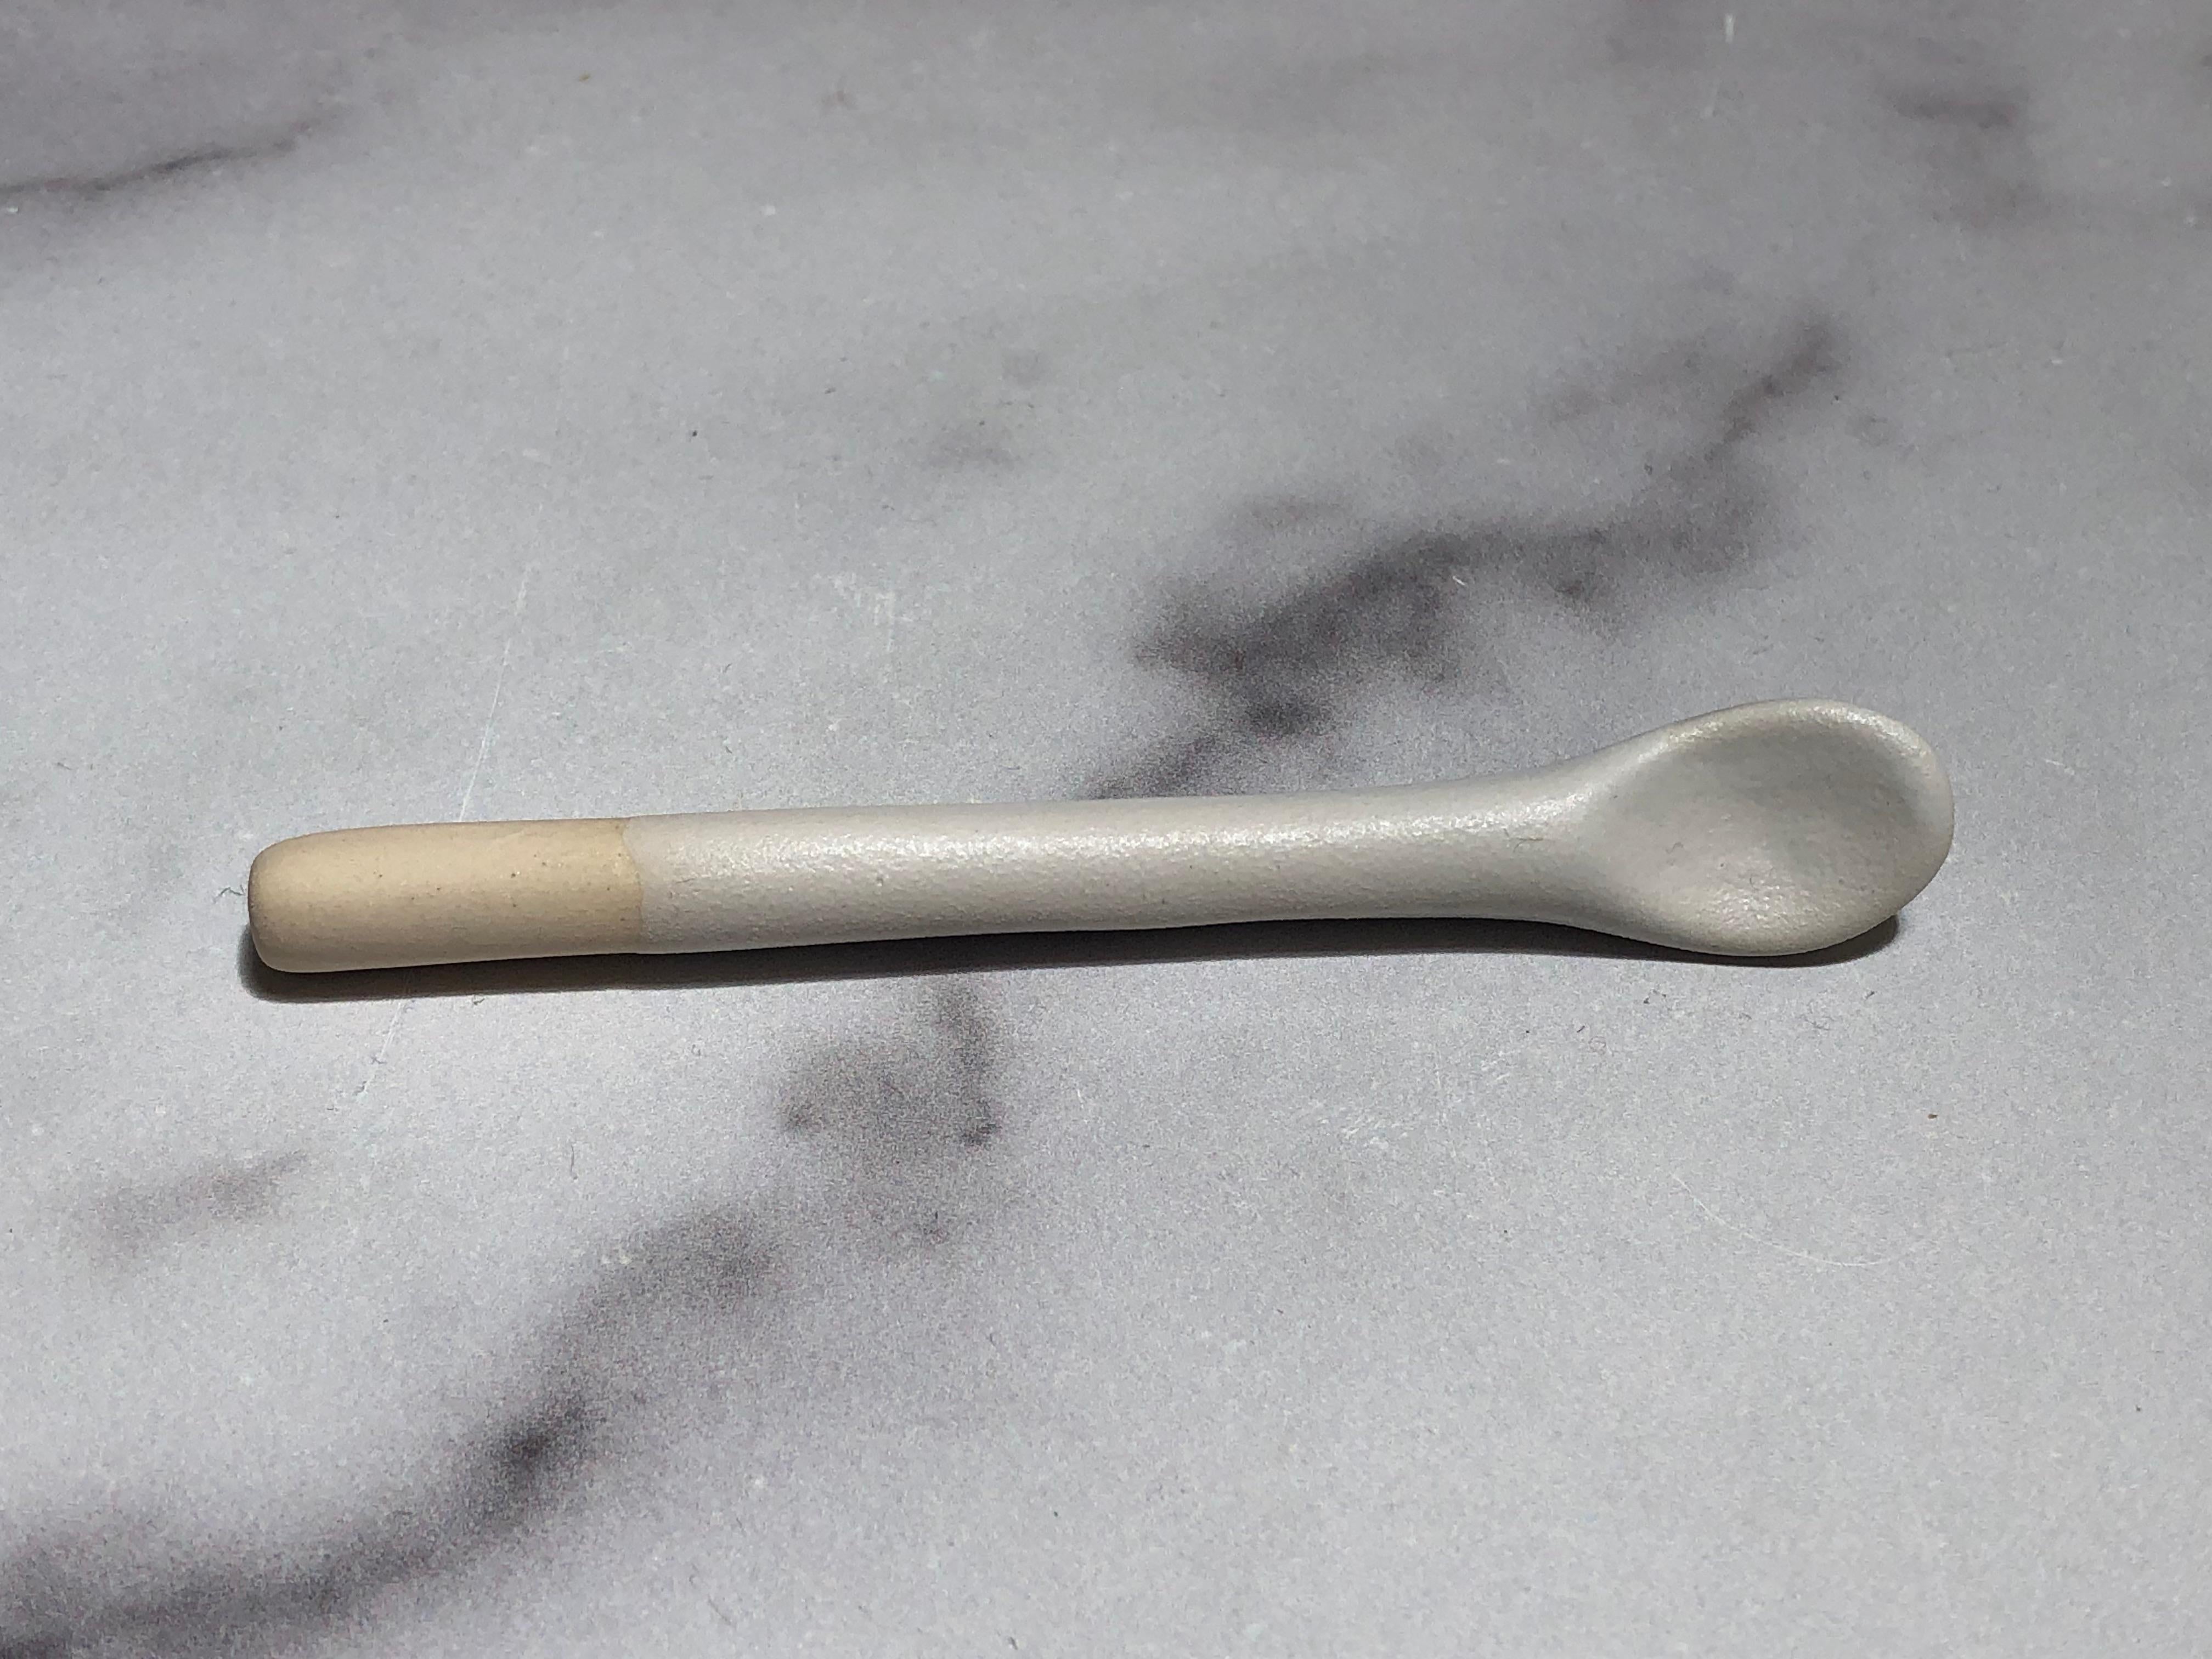 Handmade and hand painted ceramics from one of the mother countries, Portugal, these beautiful pieces for your table will add a modern touch and are perfect to mix and match. This matte-glazed spoon is available in black or white.

Size: